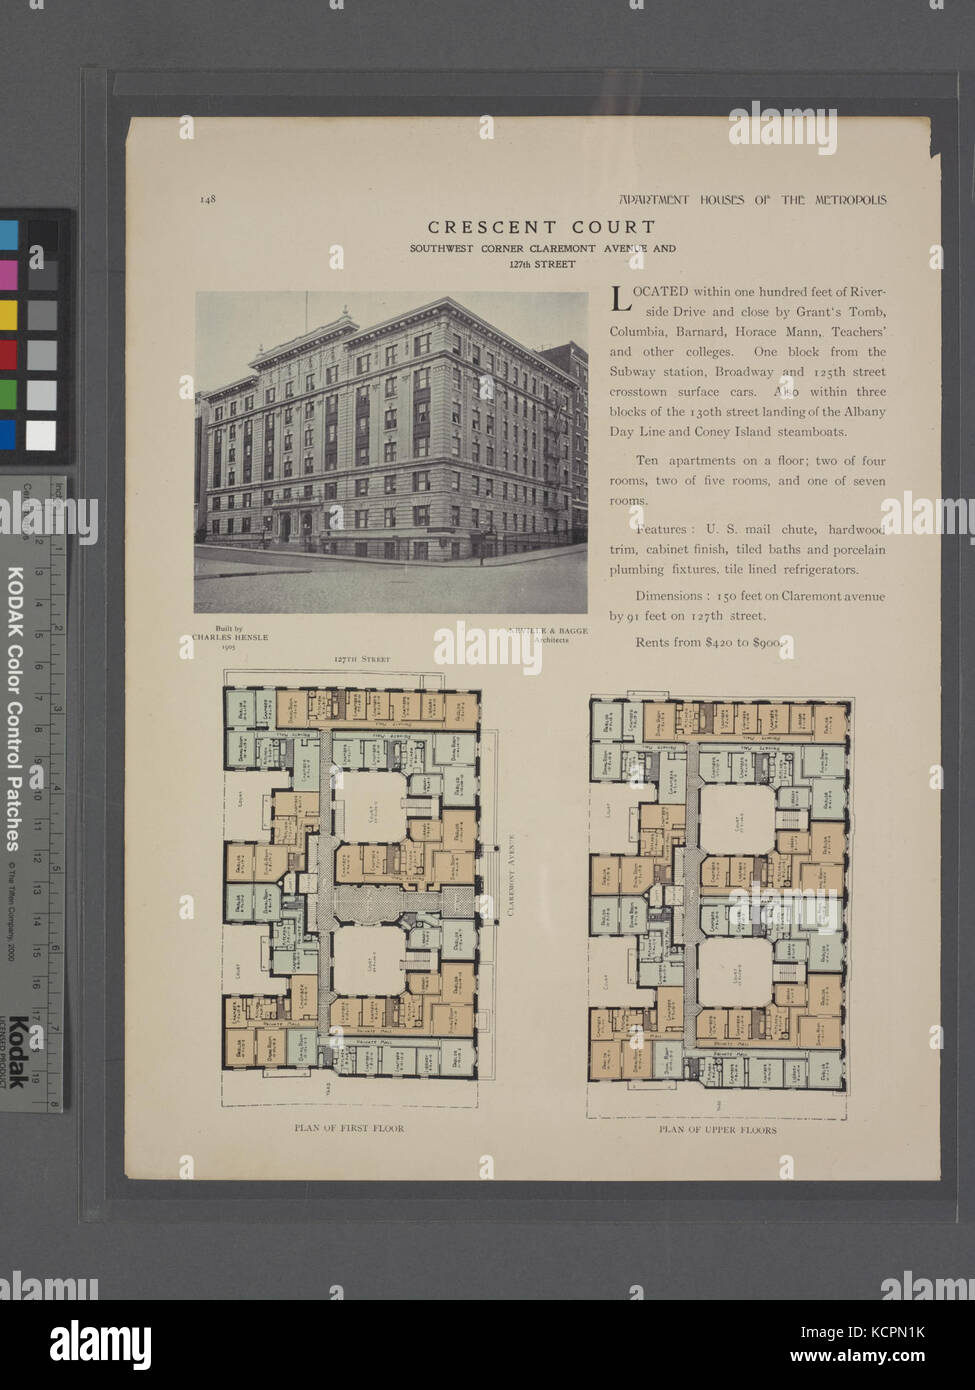 Crescent Court, southwest corner Claremont Avenue and 127th Street; Plan of first floor; Plan of upper floors (NYPL b12647274 465572) Stock Photo